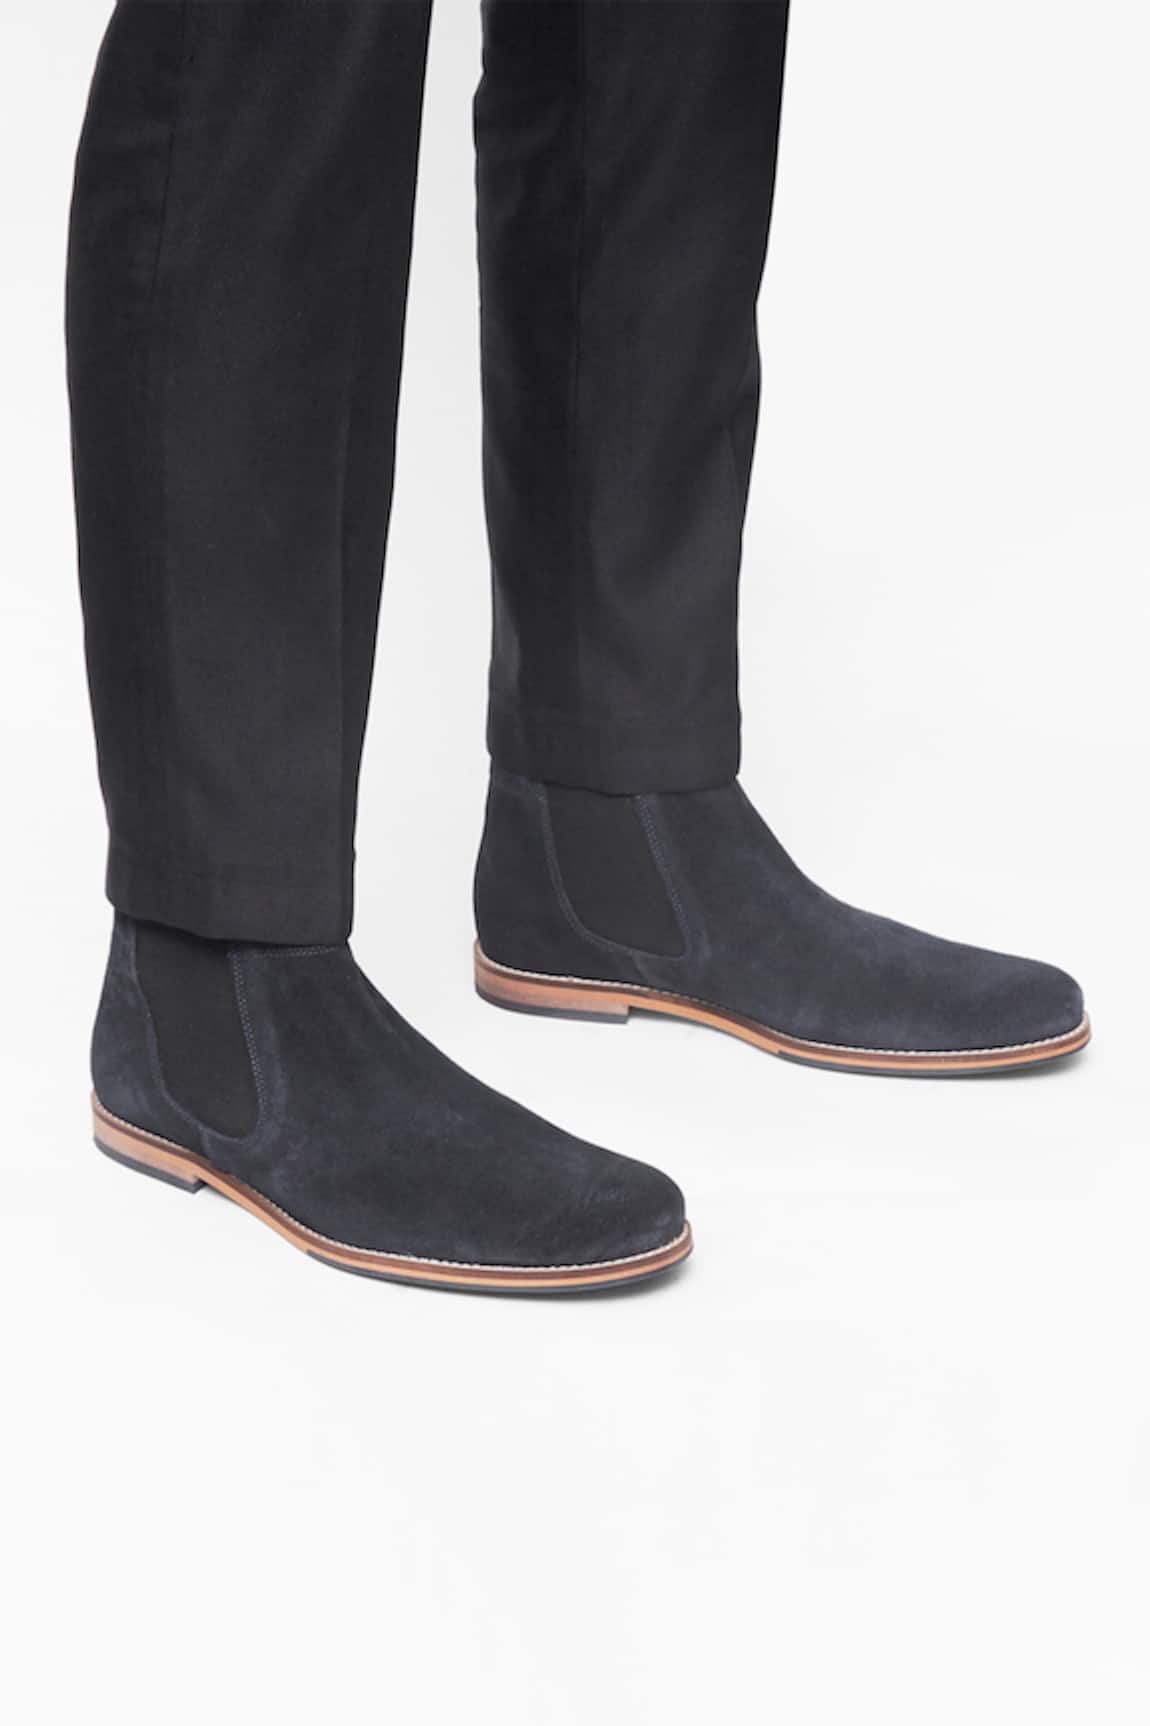 Hats Off Accessories Suede Leather Chelsea Boots